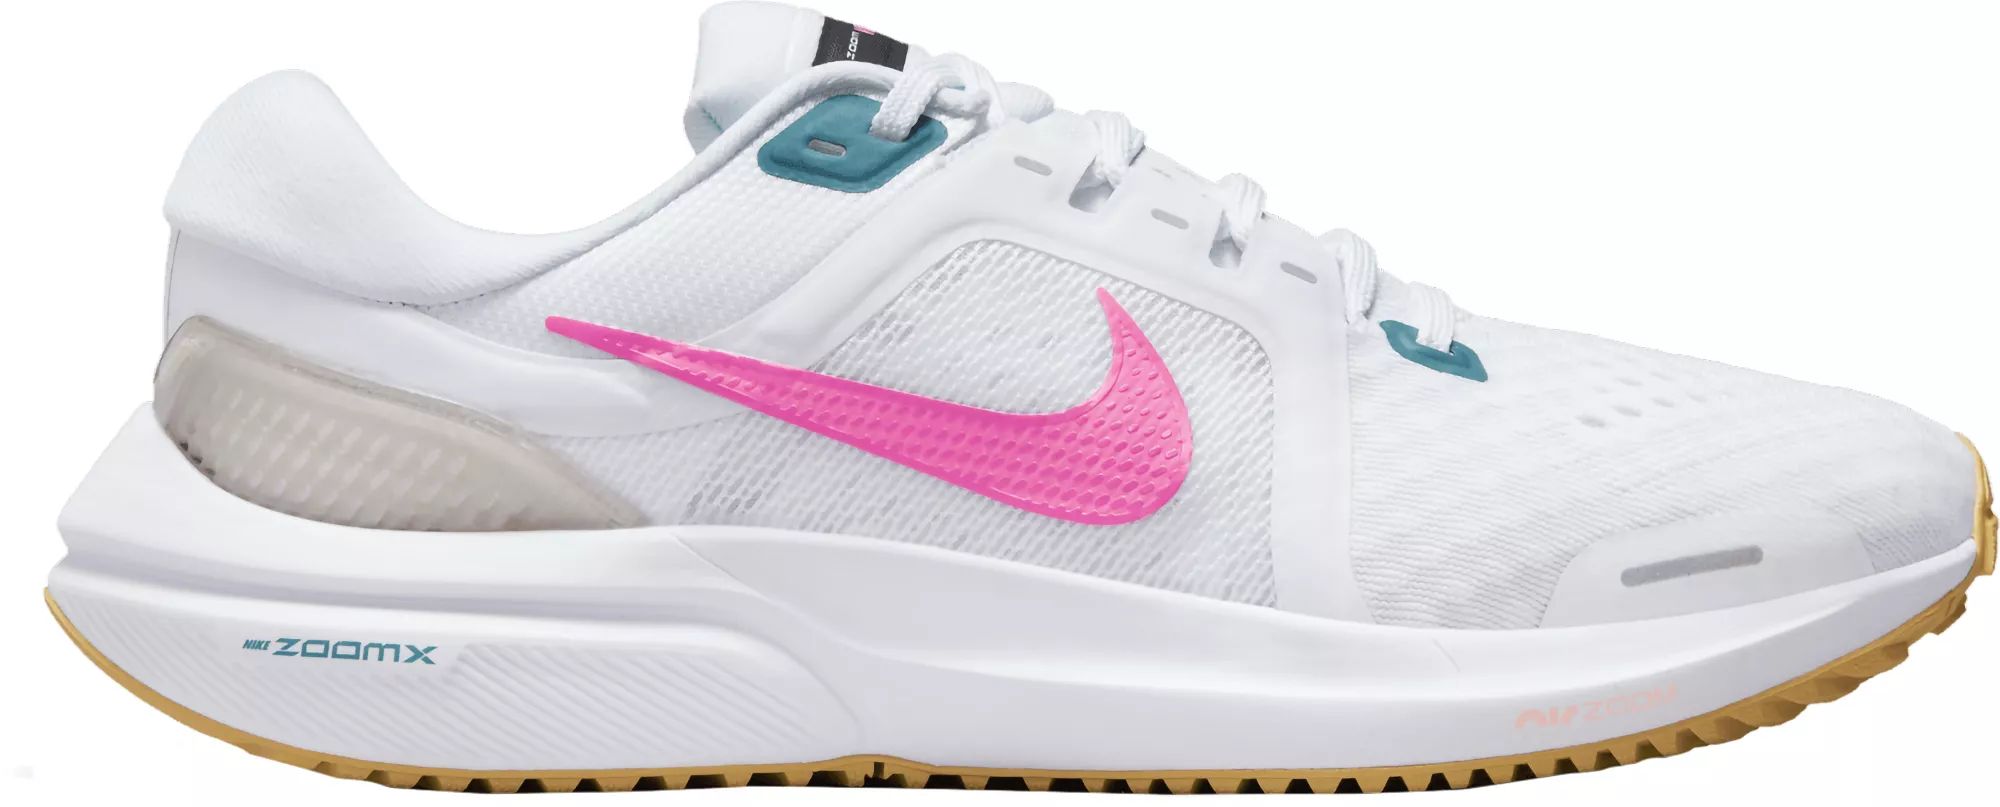 Nike Women's Vomero 16 Running Shoes, Size 9, White/Pink/Gold | Dick's Sporting Goods